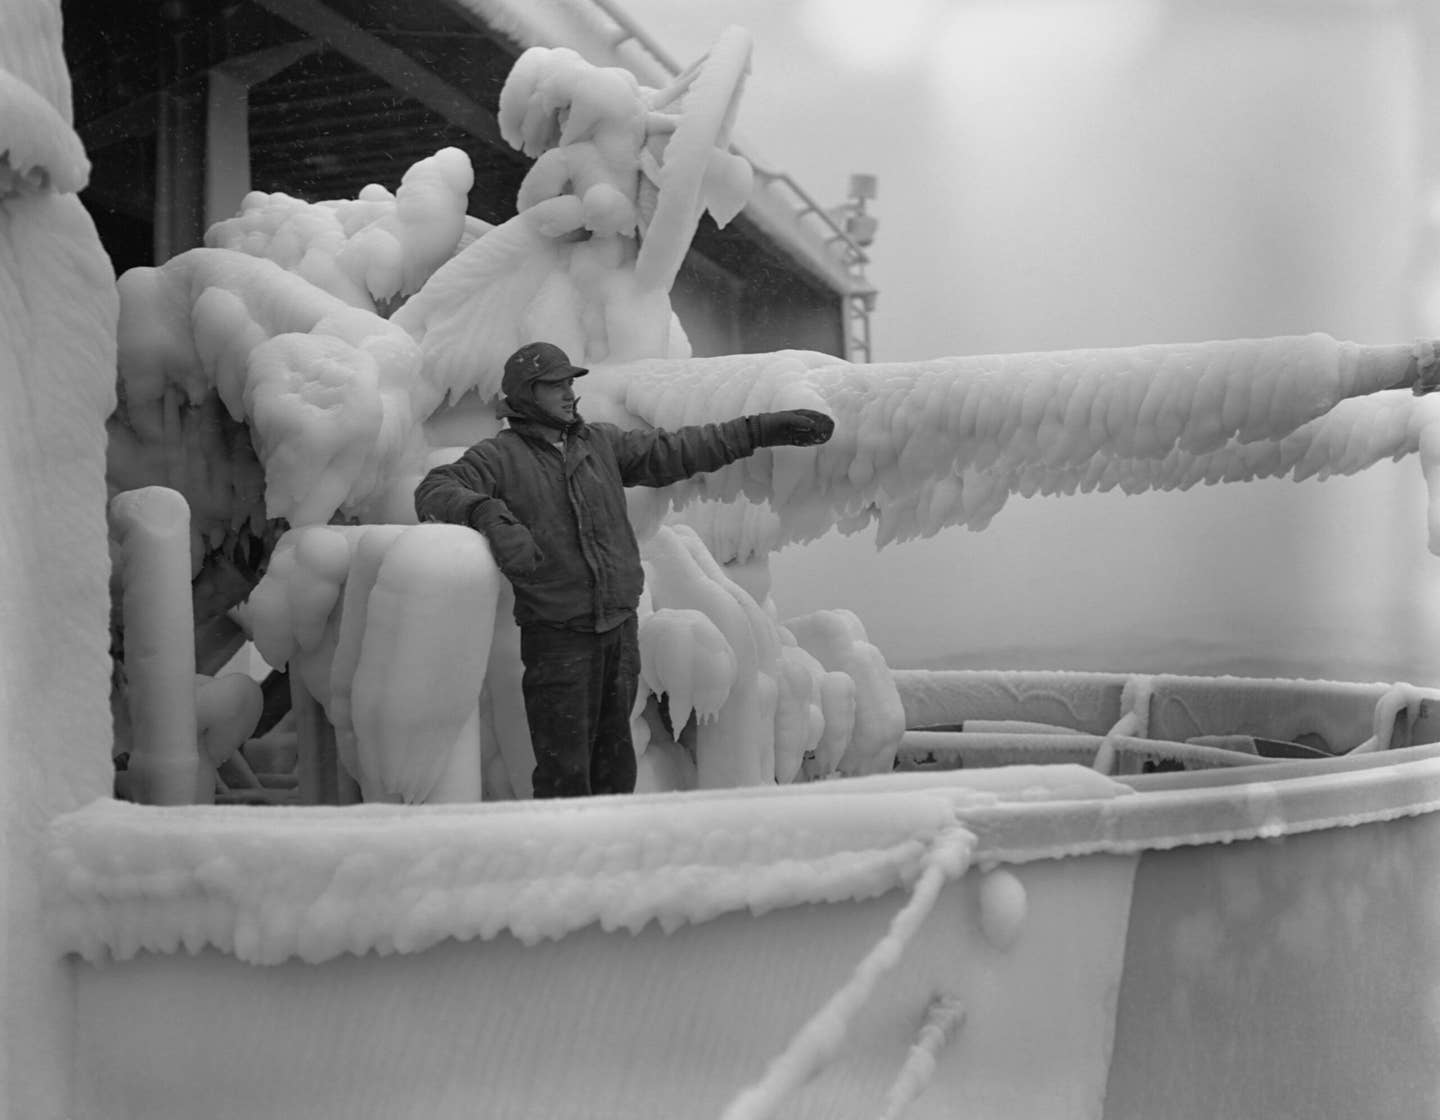 A gun captain on a mount aboard the aircraft carrier USS <em>Oriskany</em> inspects the thick layer of ice covering the gun, mount, and mechanism while cruising off Korea. <em>Photo by © CORBIS/Corbis via Getty Images</em>